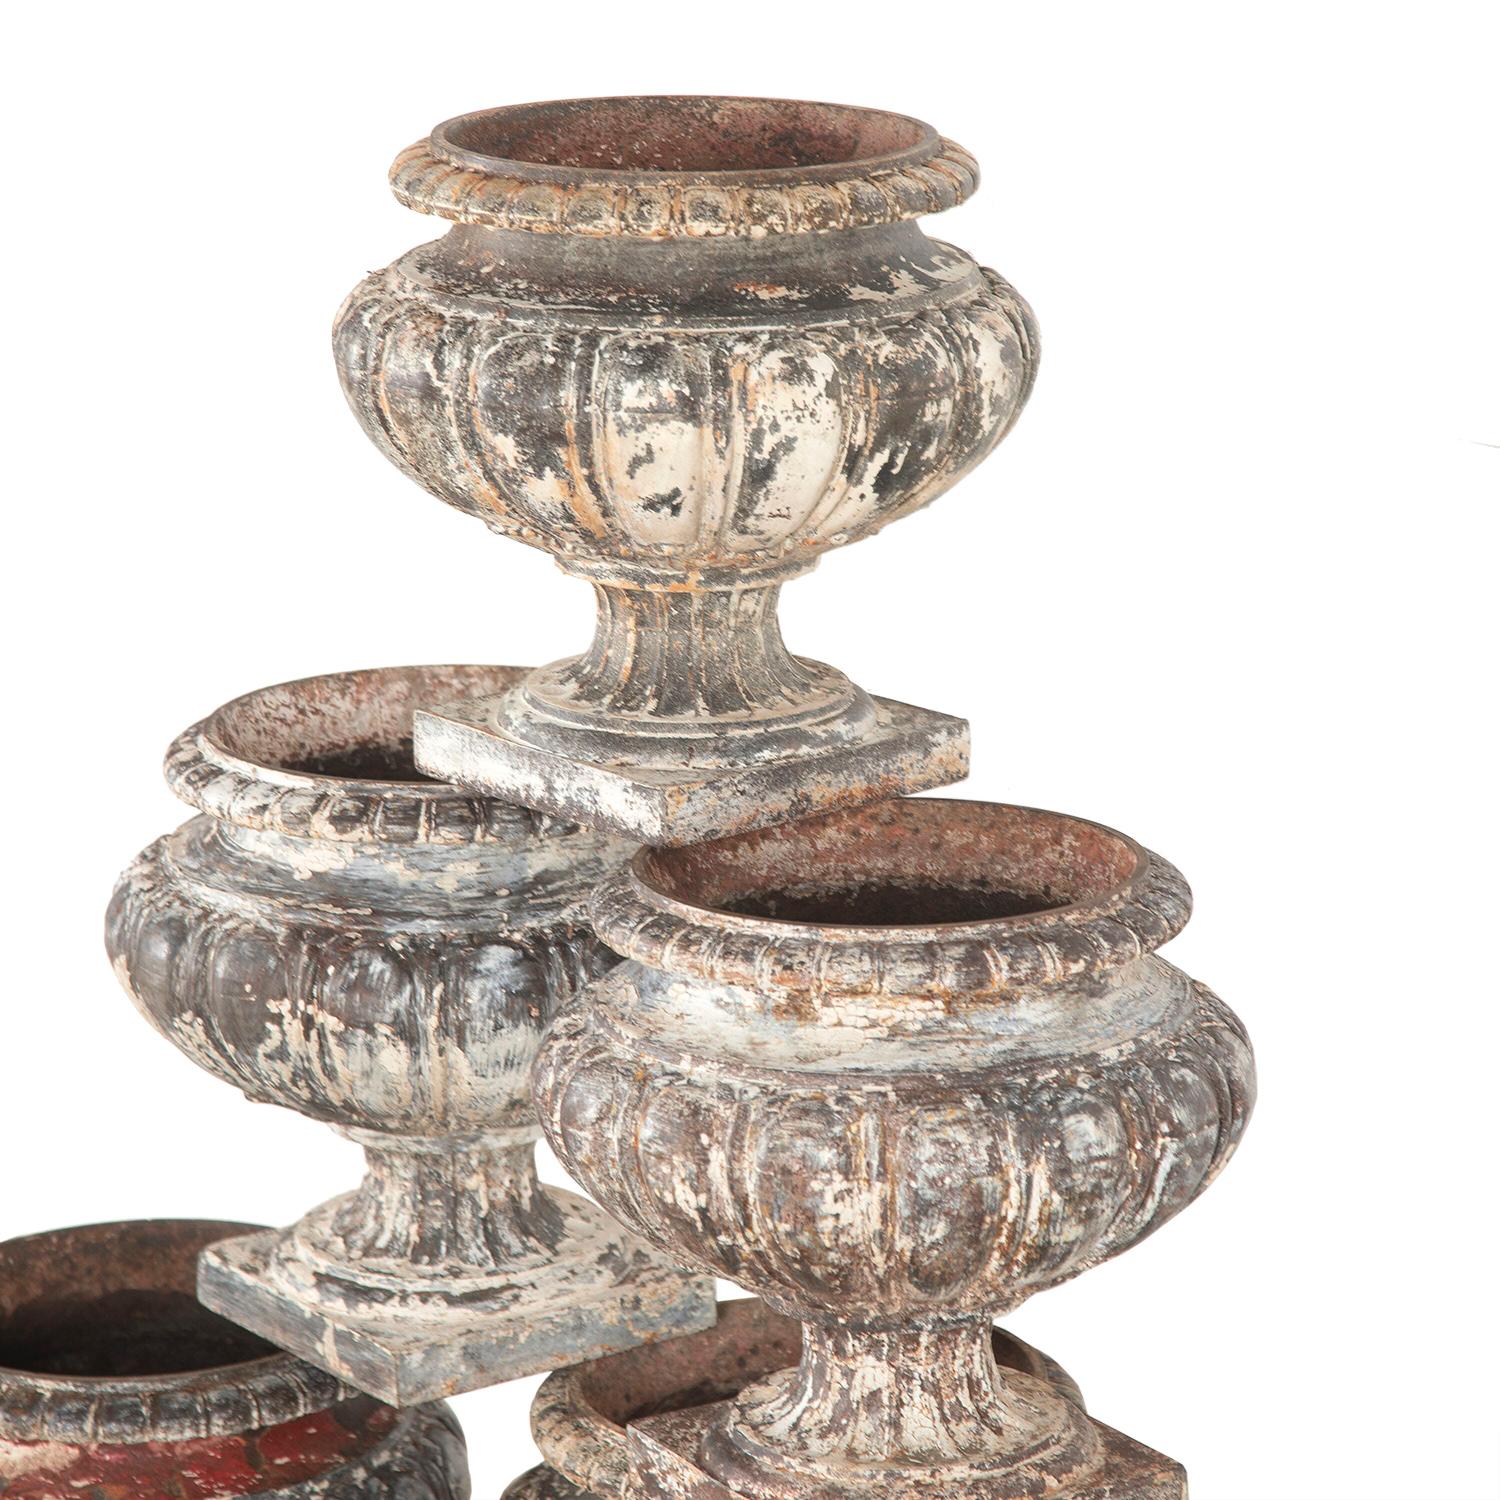 Wonderful collection of six 19th century urns from the South of France. 
These charming urns all have a pumpkin shape and decorative moulded details. They have all weathered and worn beautifully, with varying patinas. 
Grouped together as a set or